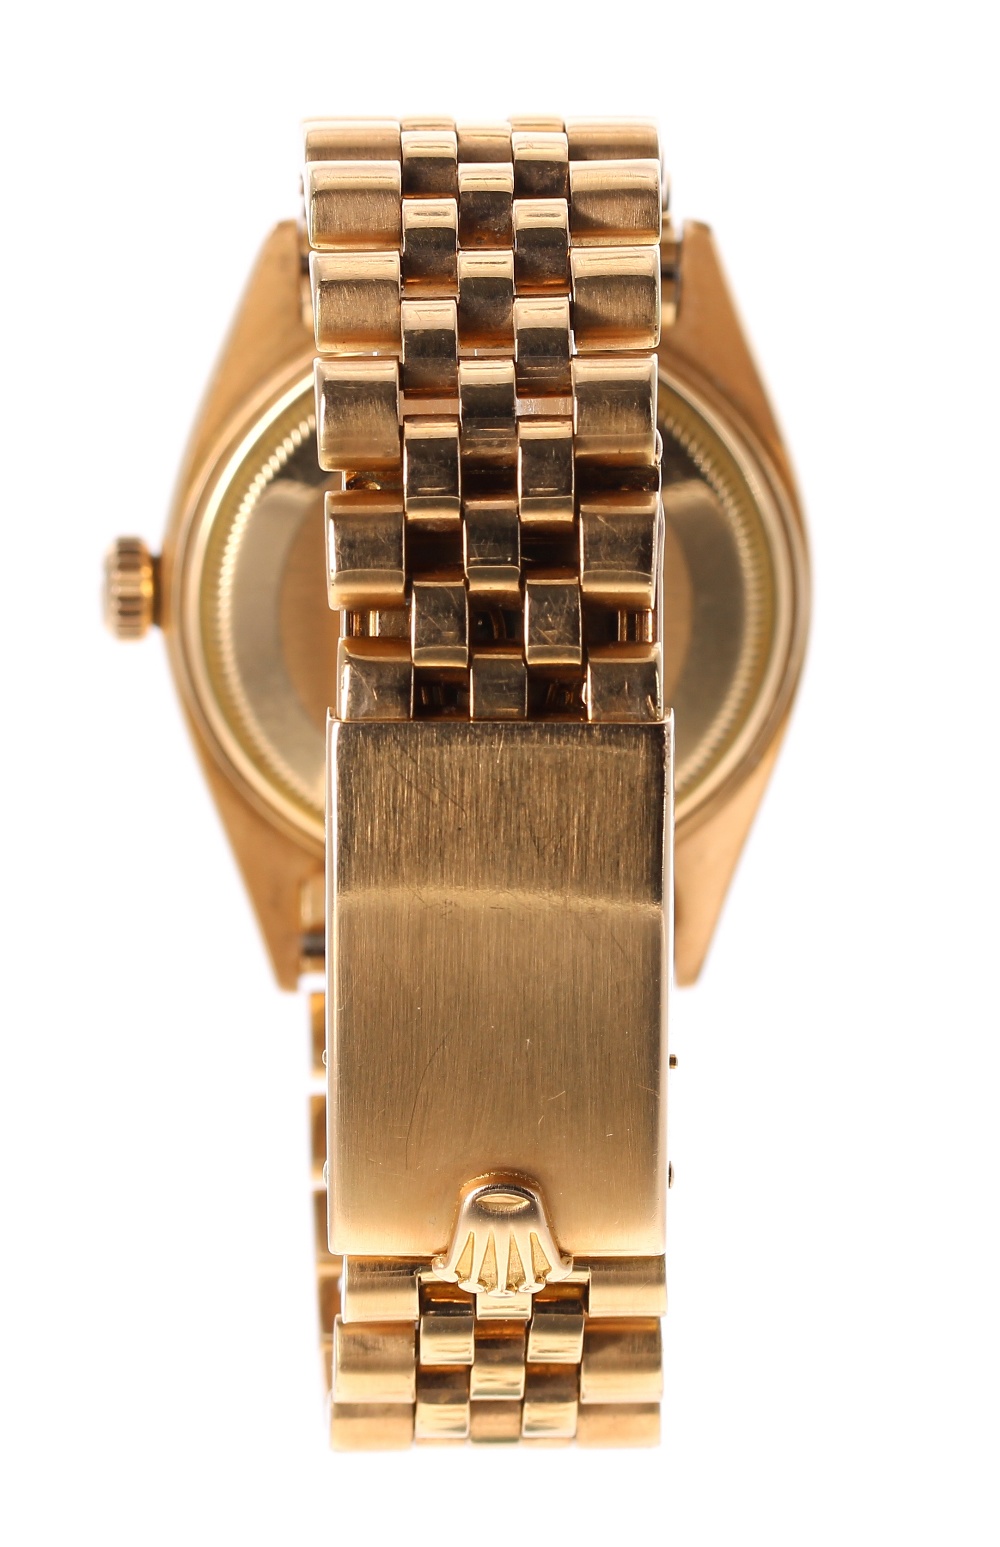 Rolex Oyster Perpetual Datejust 18ct gentleman's bracelet watch, ref. 1601, circa 1978, serial no. - Image 4 of 5